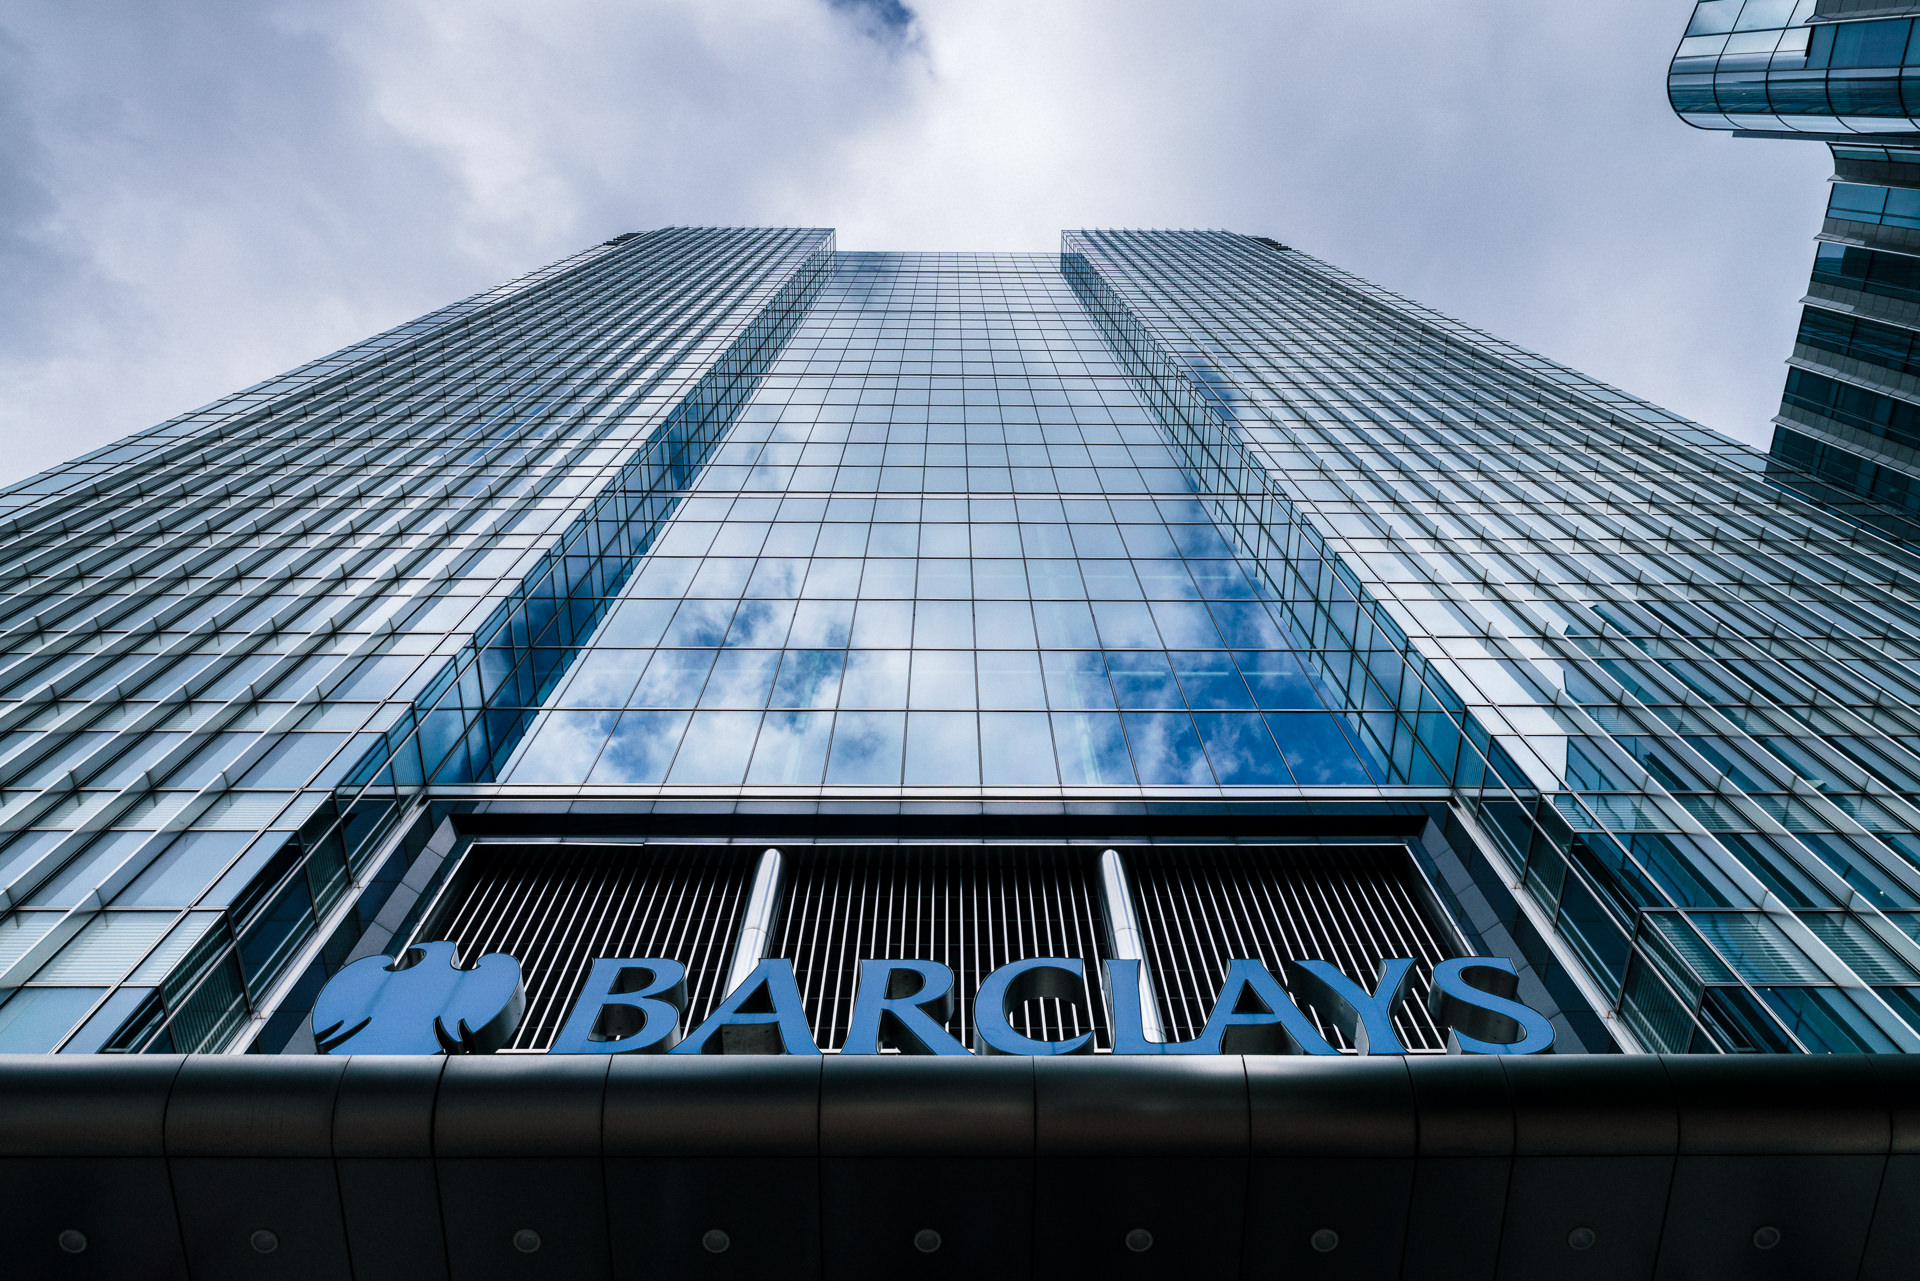 Banking Citizenship Event at Barclays HQ, London UK – corporate event photography